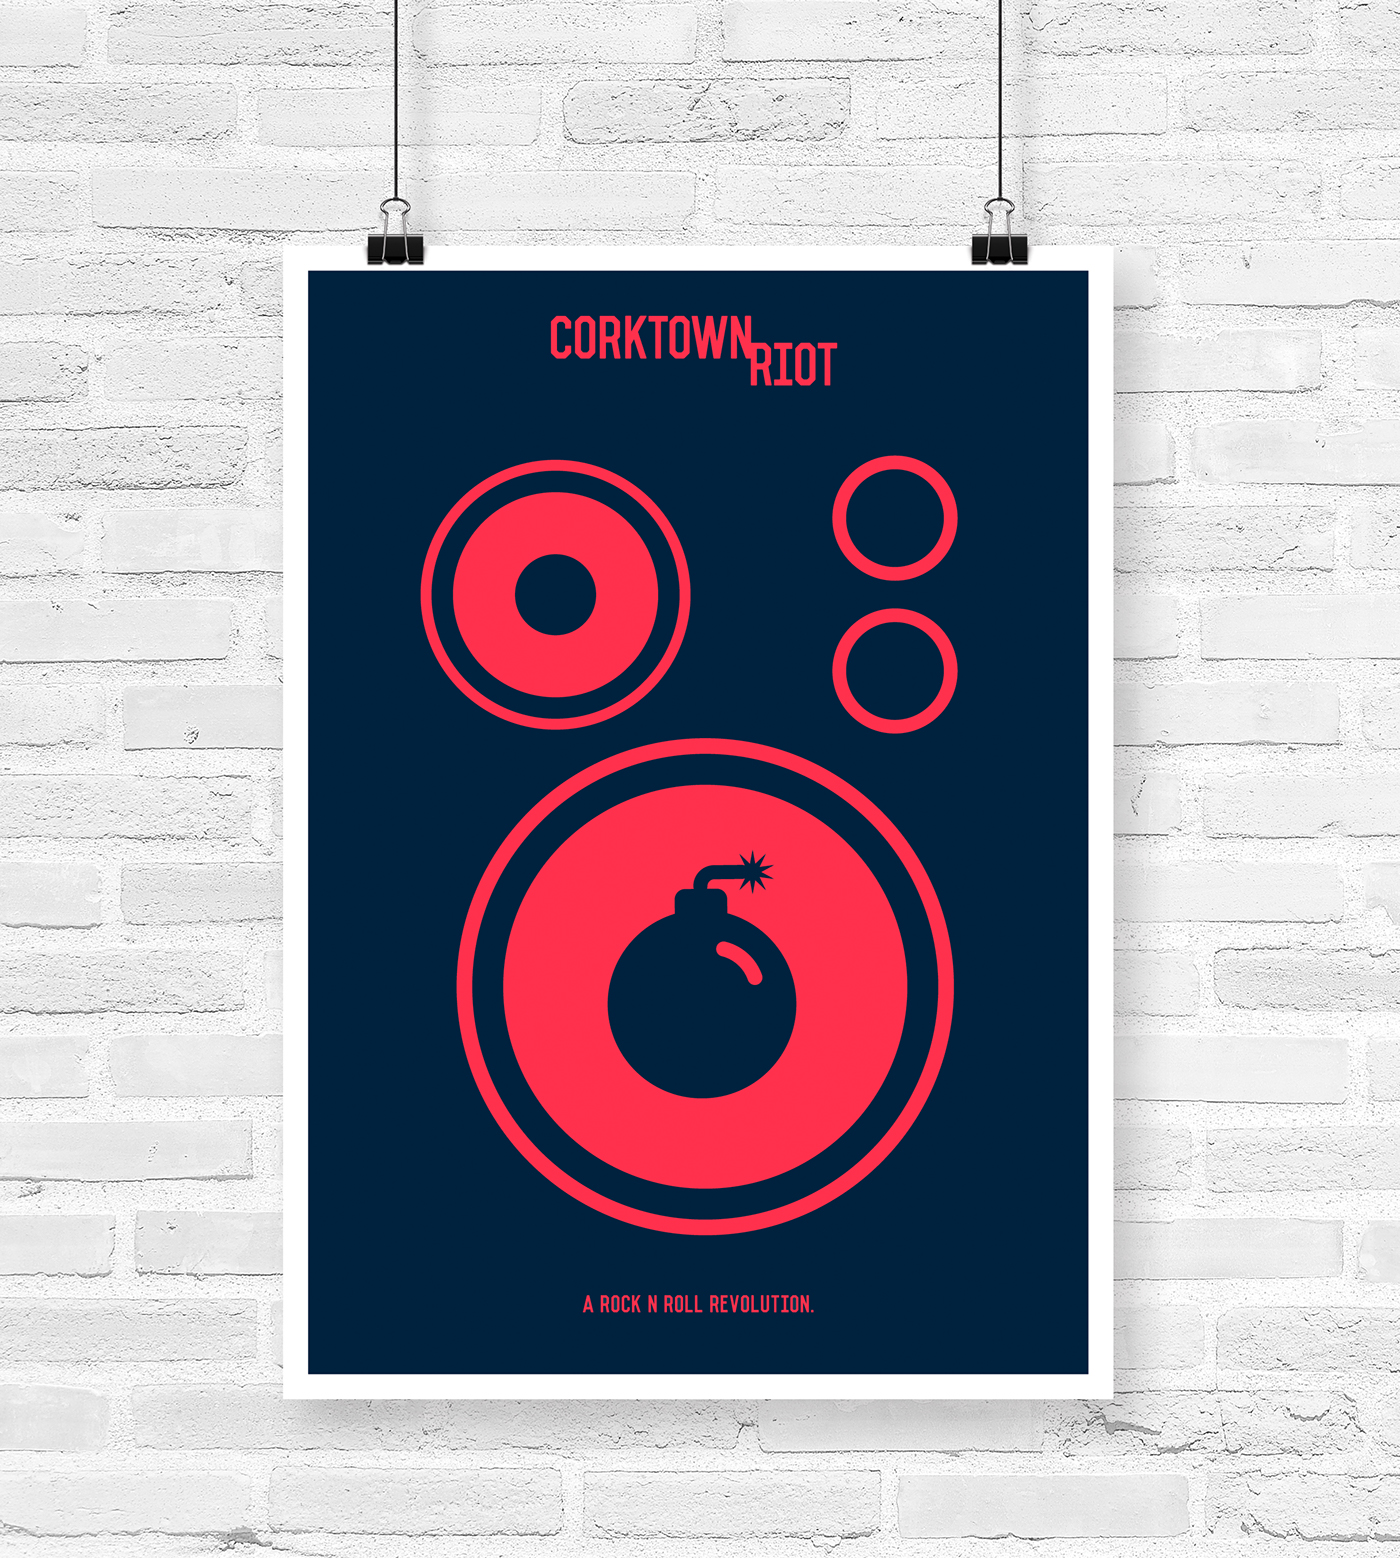 Classic Rock Rock And Roll rock n roll screen printed rock band band poster minimalist gas mask